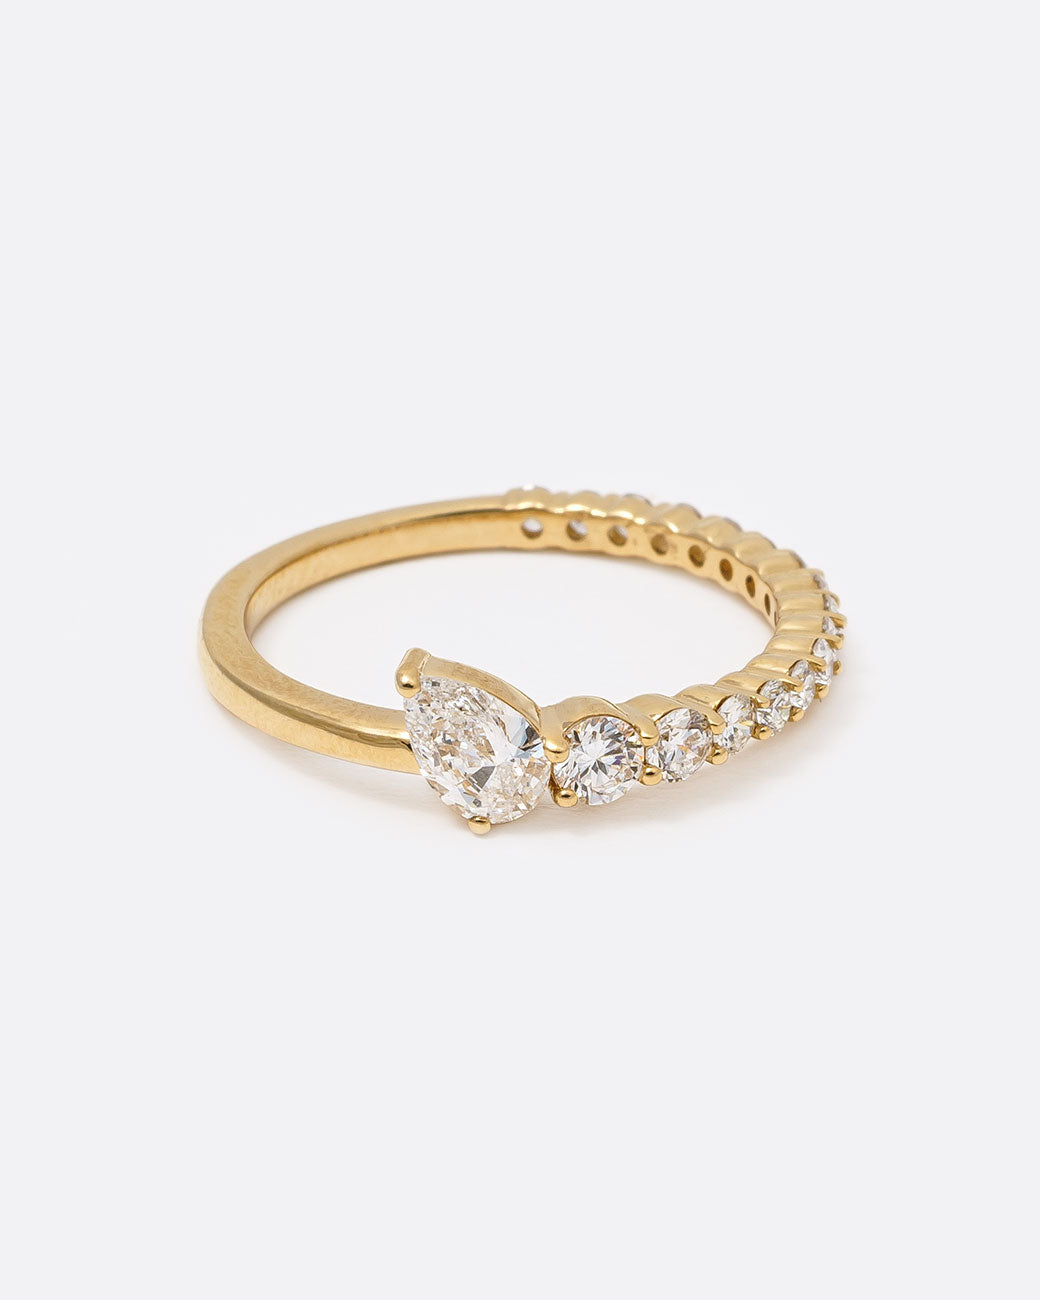 14k yellow gold ring with graduated white diamonds halfway around and one pear shaped white diamond by Selin Kent, from the front.